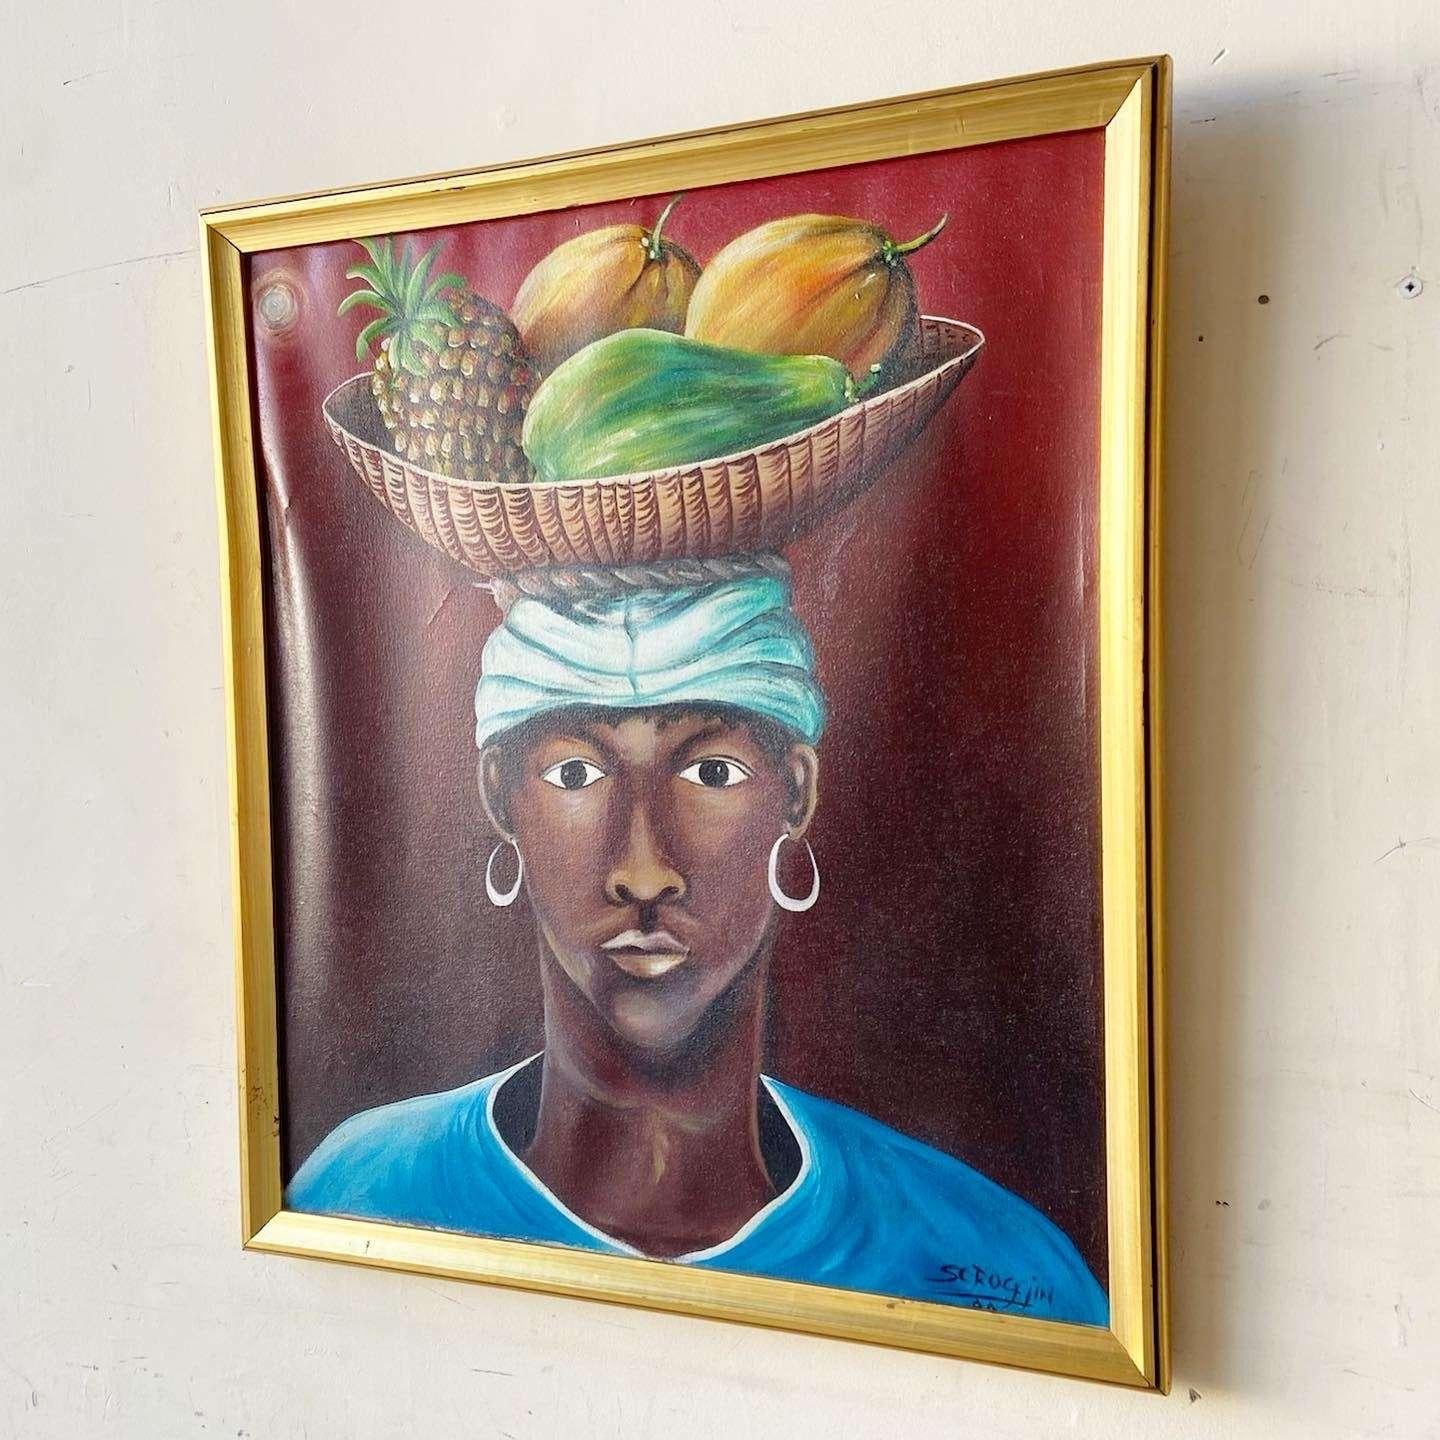 Original Framed Oil Painting of Caribbean Woman With Fruit Bowl by Scroggin In Good Condition For Sale In Delray Beach, FL